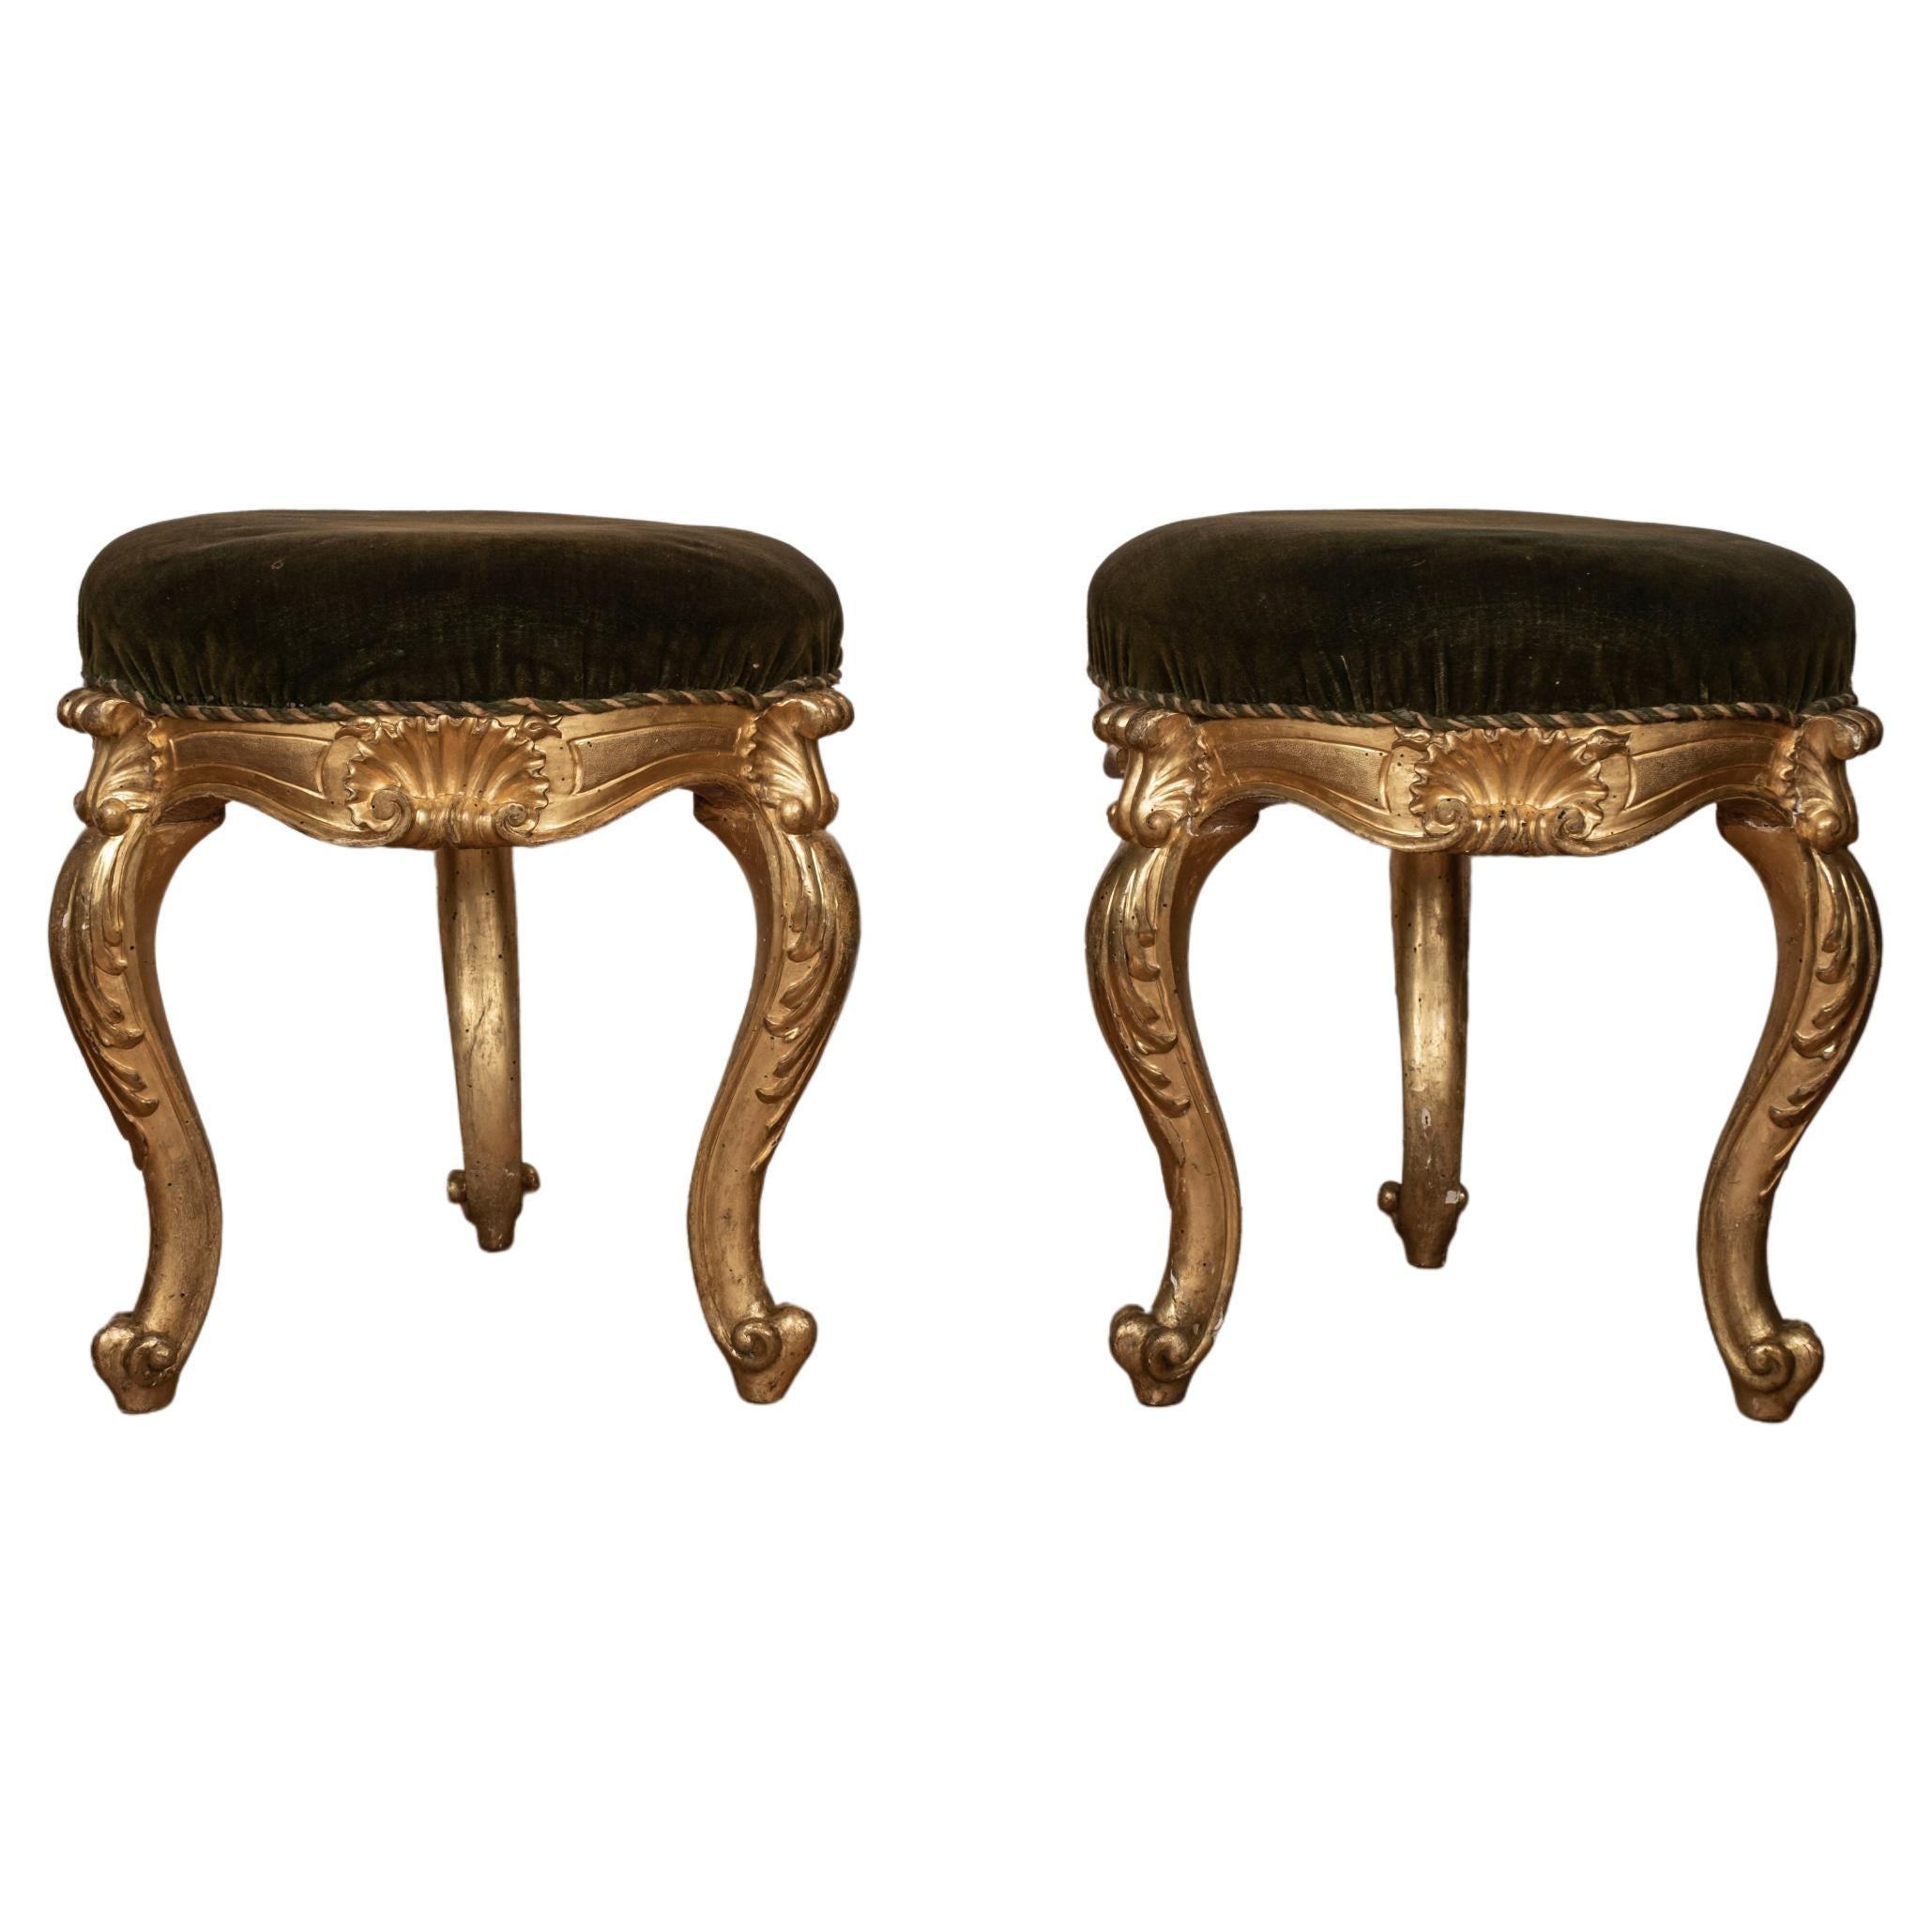 Pair of 19th Century Italian Regence Style Giltwood Benches